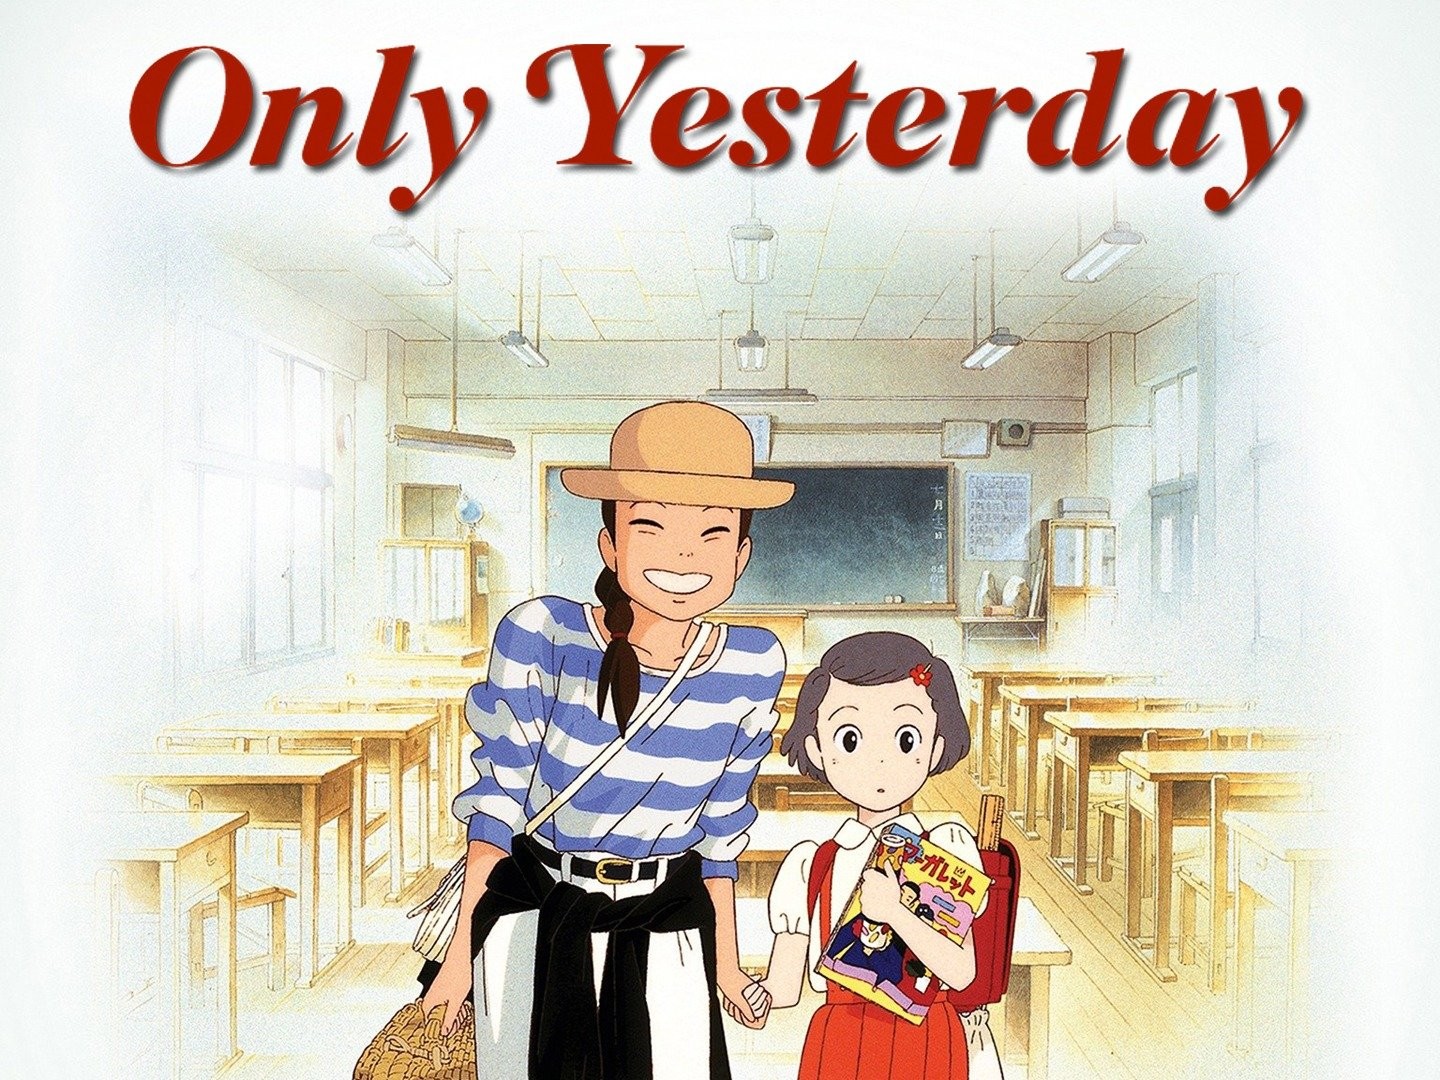 Only Yesterday is a masterful reflection on youths impermanence